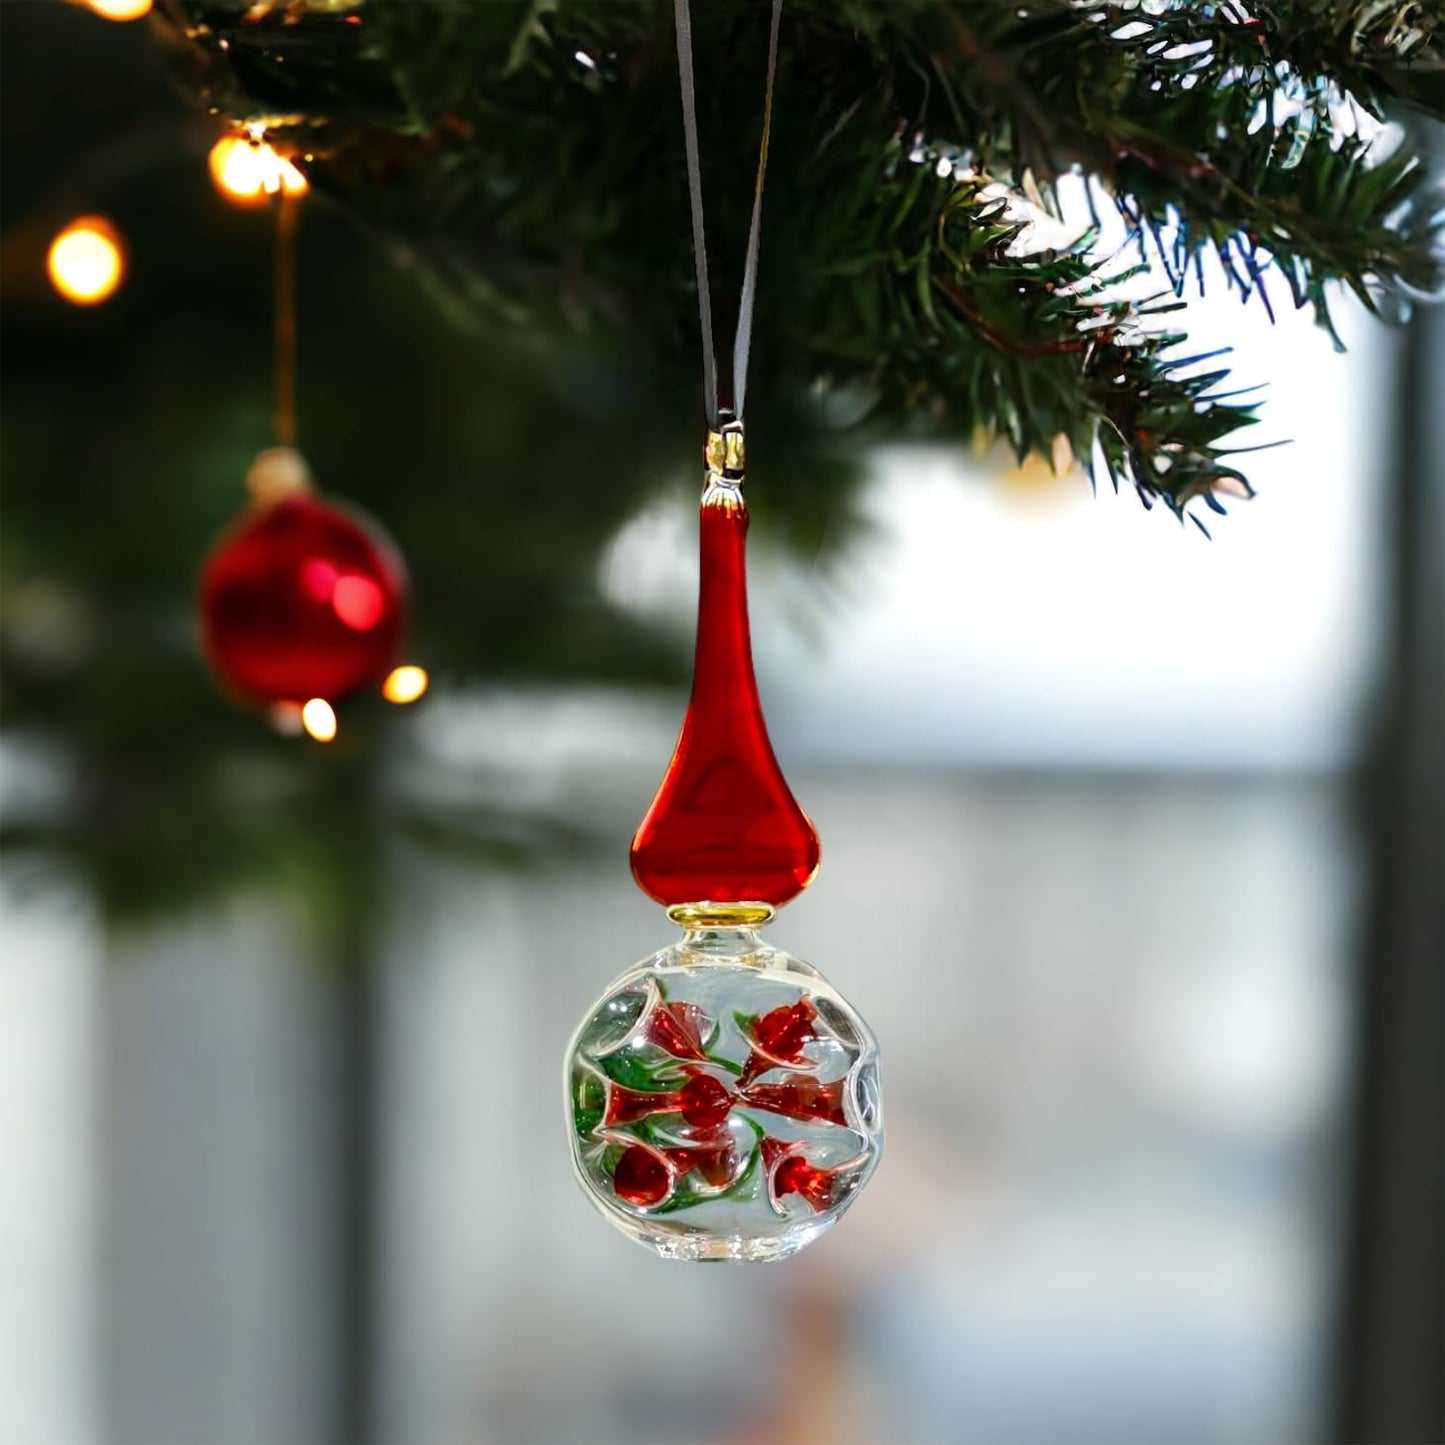 Double Layer Red Hand-Blown Glass Christmas Ornament for Xmas Decorations - Les Trois PyramideDouble Layer Red Hand-Blown Glass Christmas Ornament for Xmas Decorations - Les Trois Pyramides